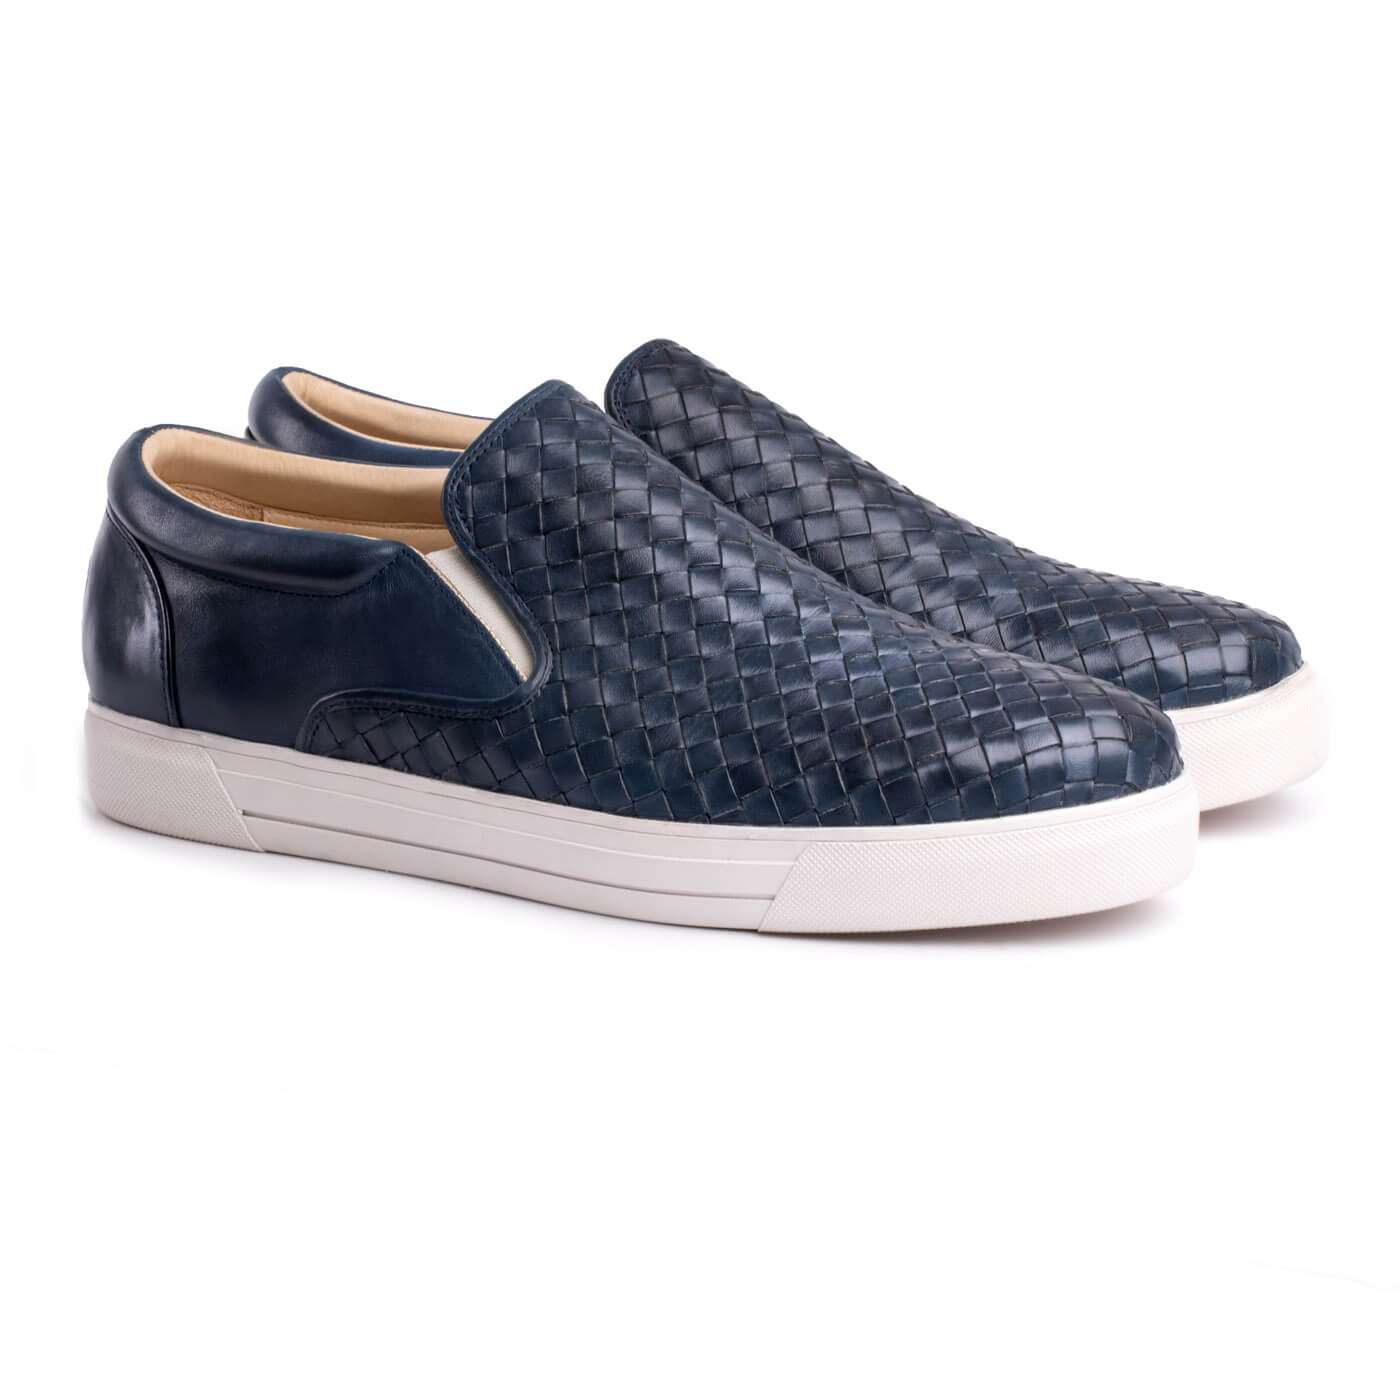 Woven slip-on shoes